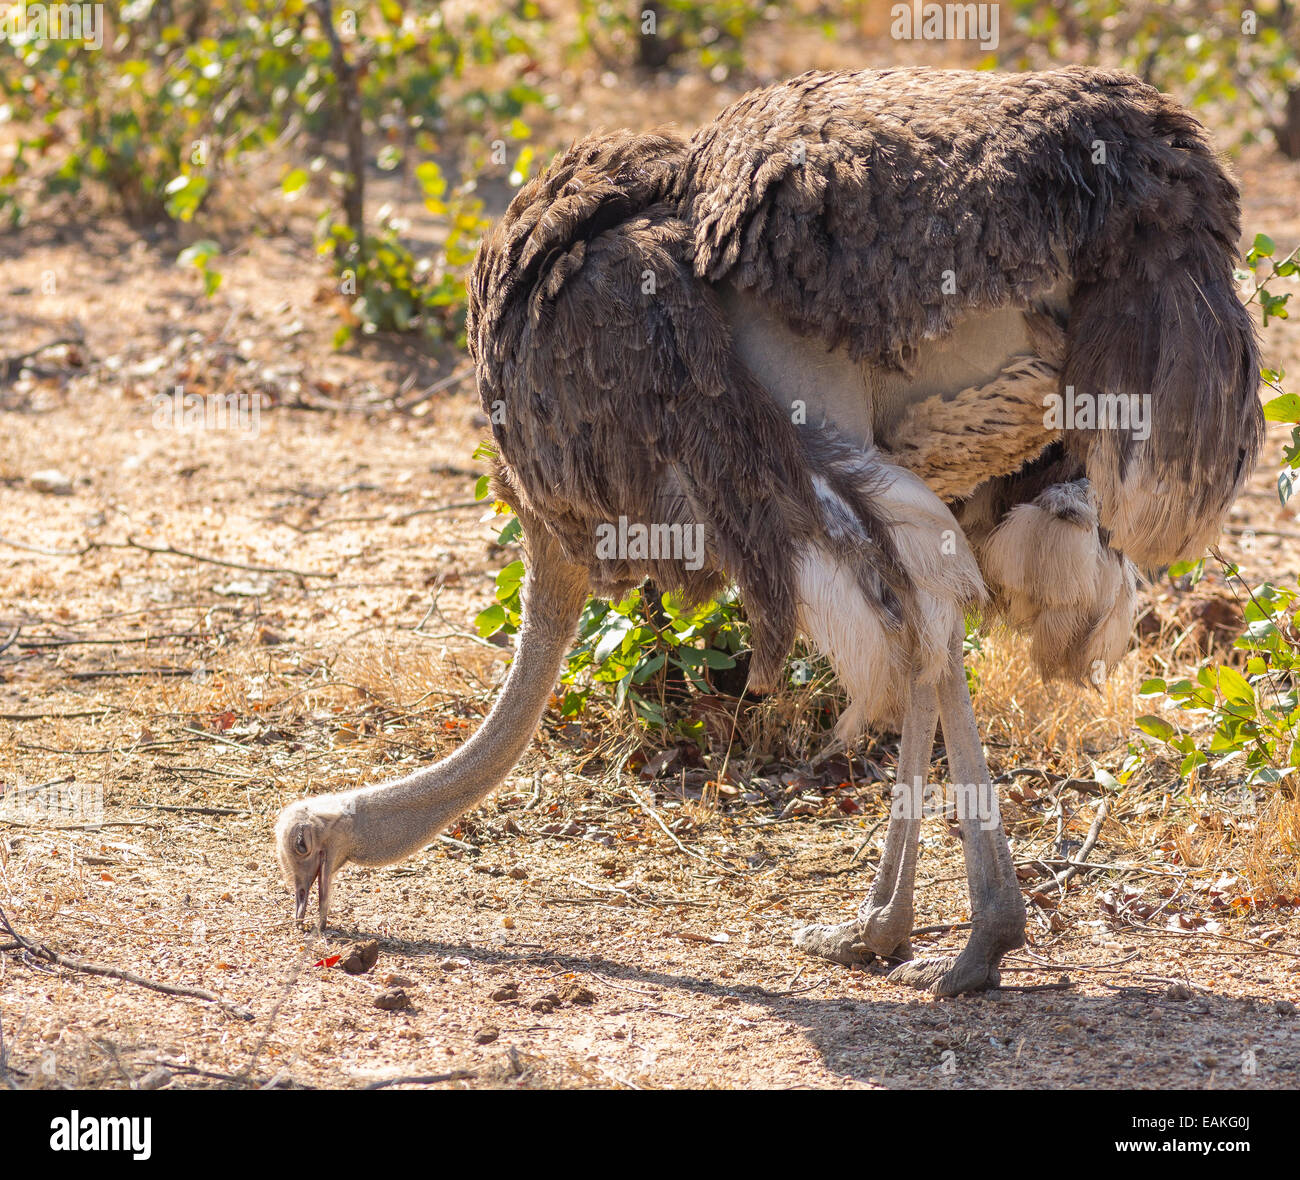 KRUGER NATIONAL PARK, SOUTH AFRICA - Common ostrich, a large flightless bird, Struthio camelus. Stock Photo